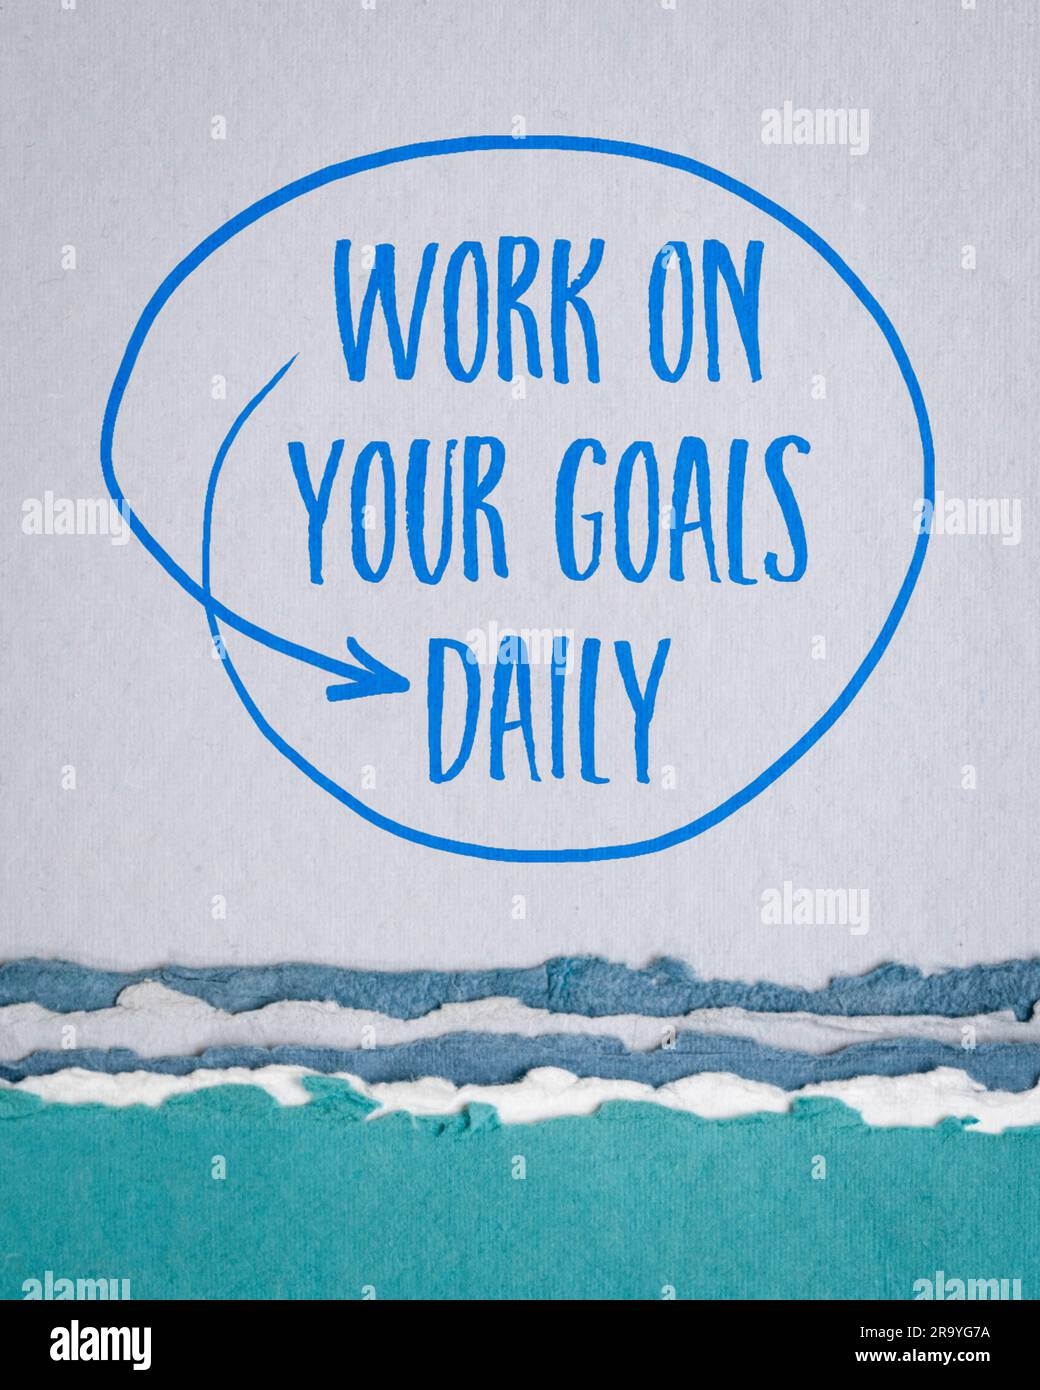 work on your goals daily - motivational reminder, handwriting on art paper, goal setting, business and personal development concept Stock Photo